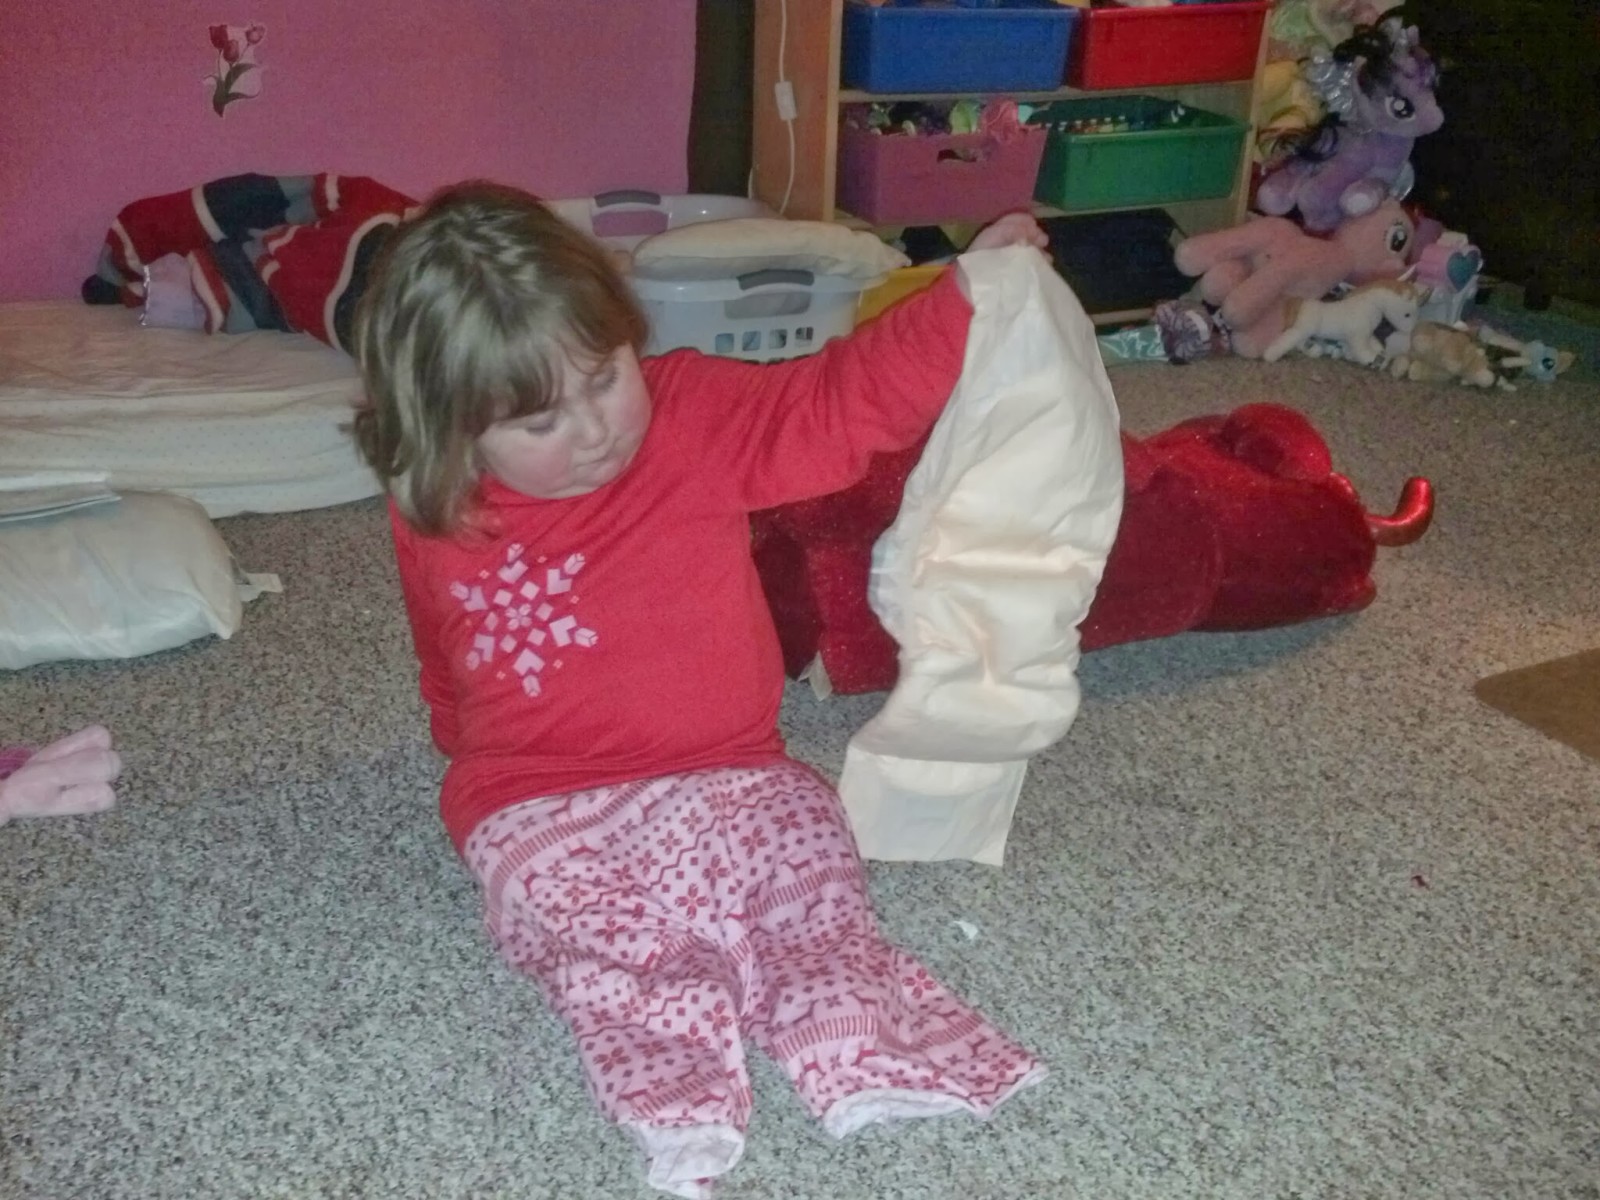 Diapers and potty training